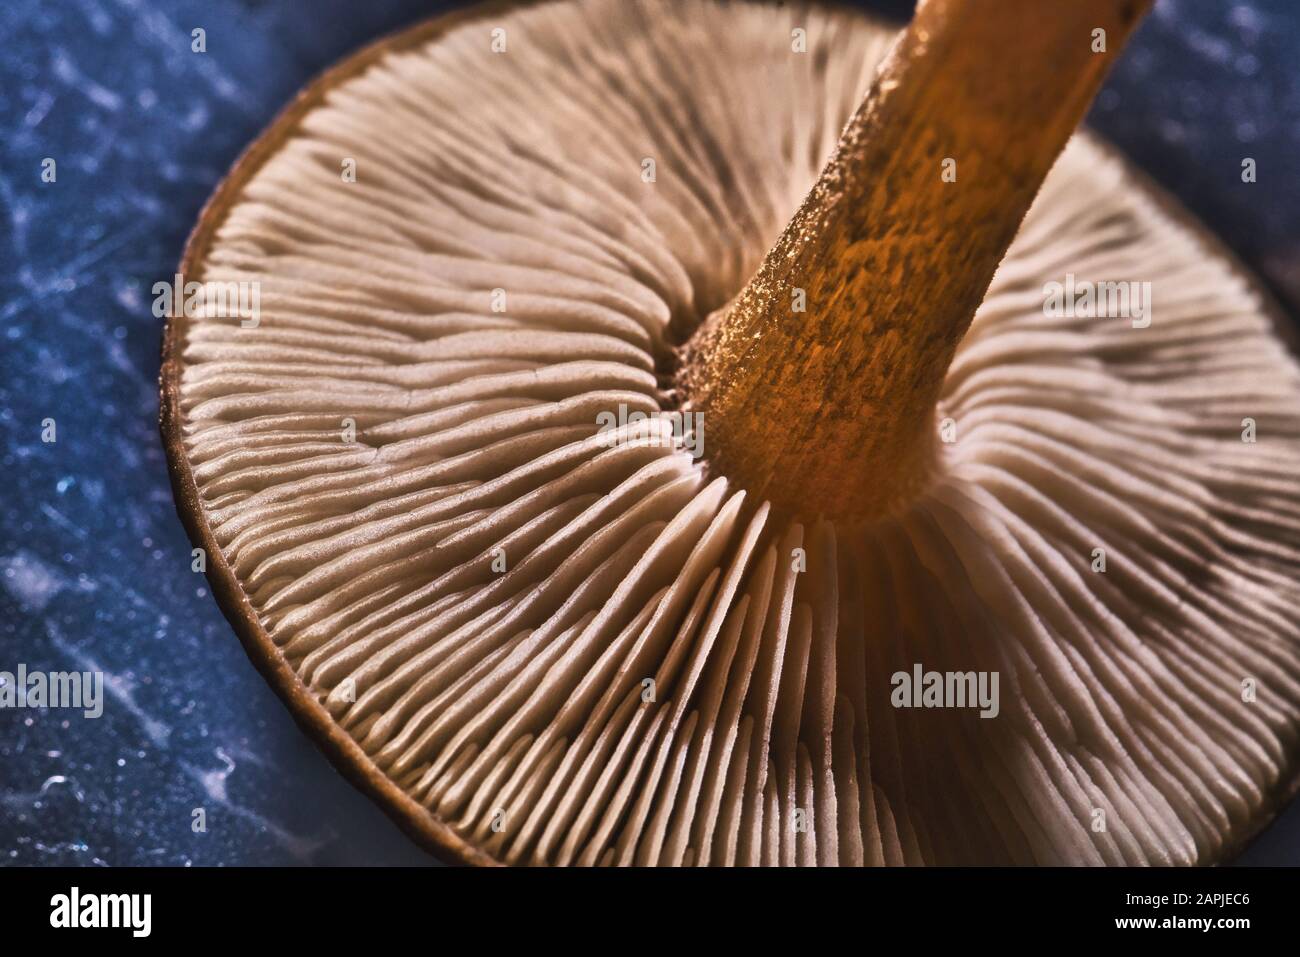 Horizontal photo with detail view on bottom part of mushroom head. The stem has nice brown color and mushroom is placed on blue background. Stock Photo